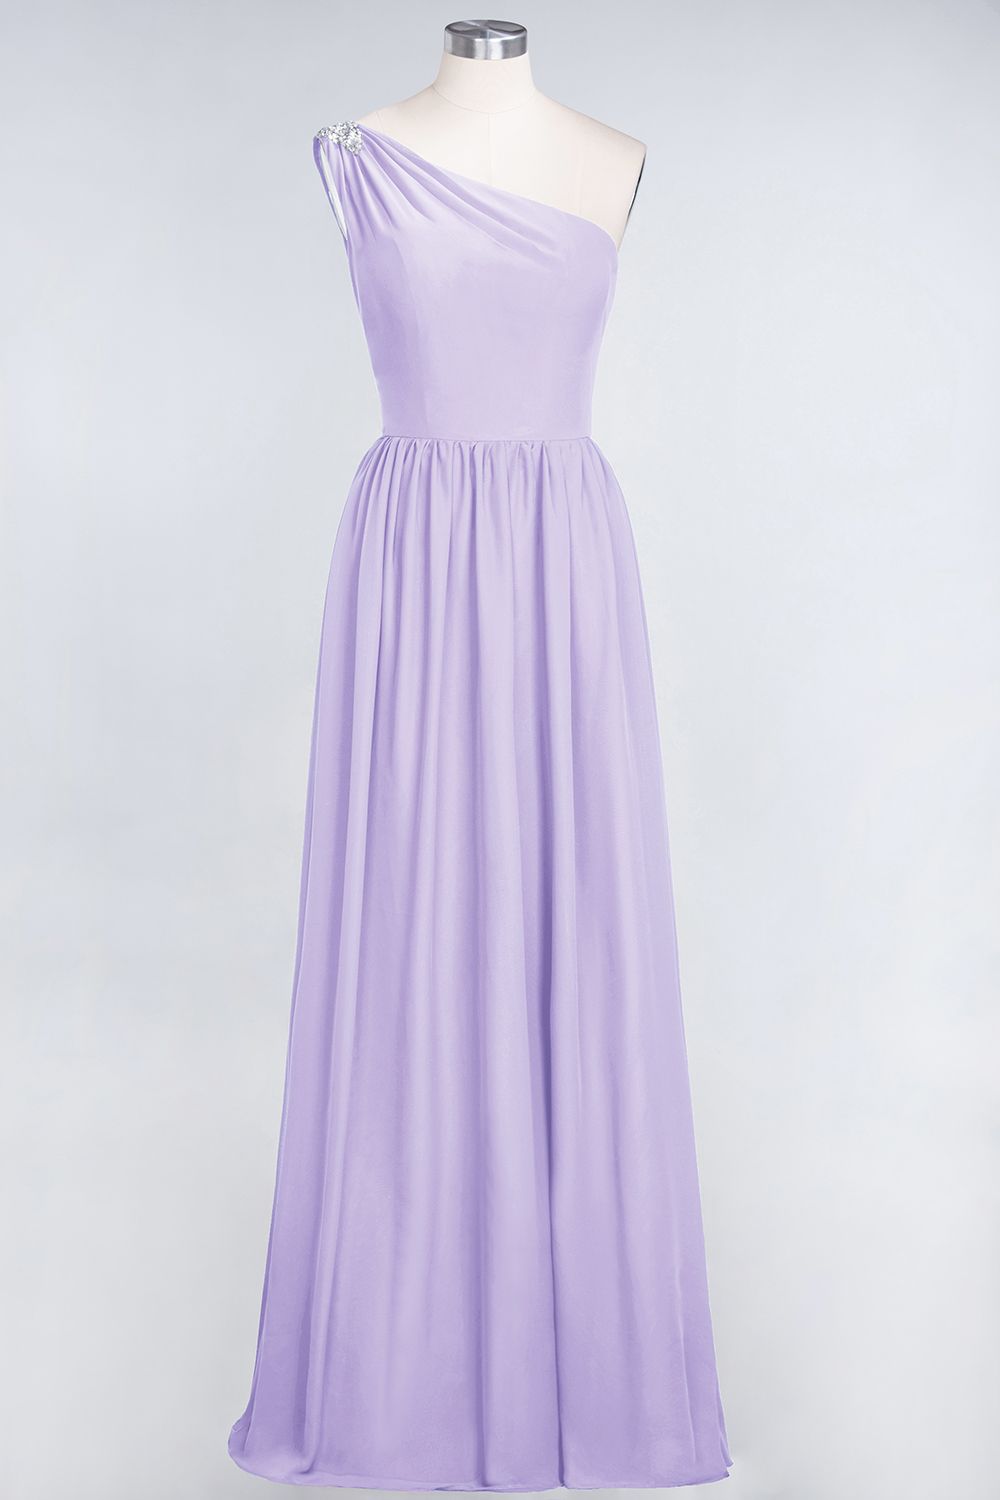 Affordable Chiffon One-Shoulder Ruffle Bridesmaid Dress with Beadings-27dress